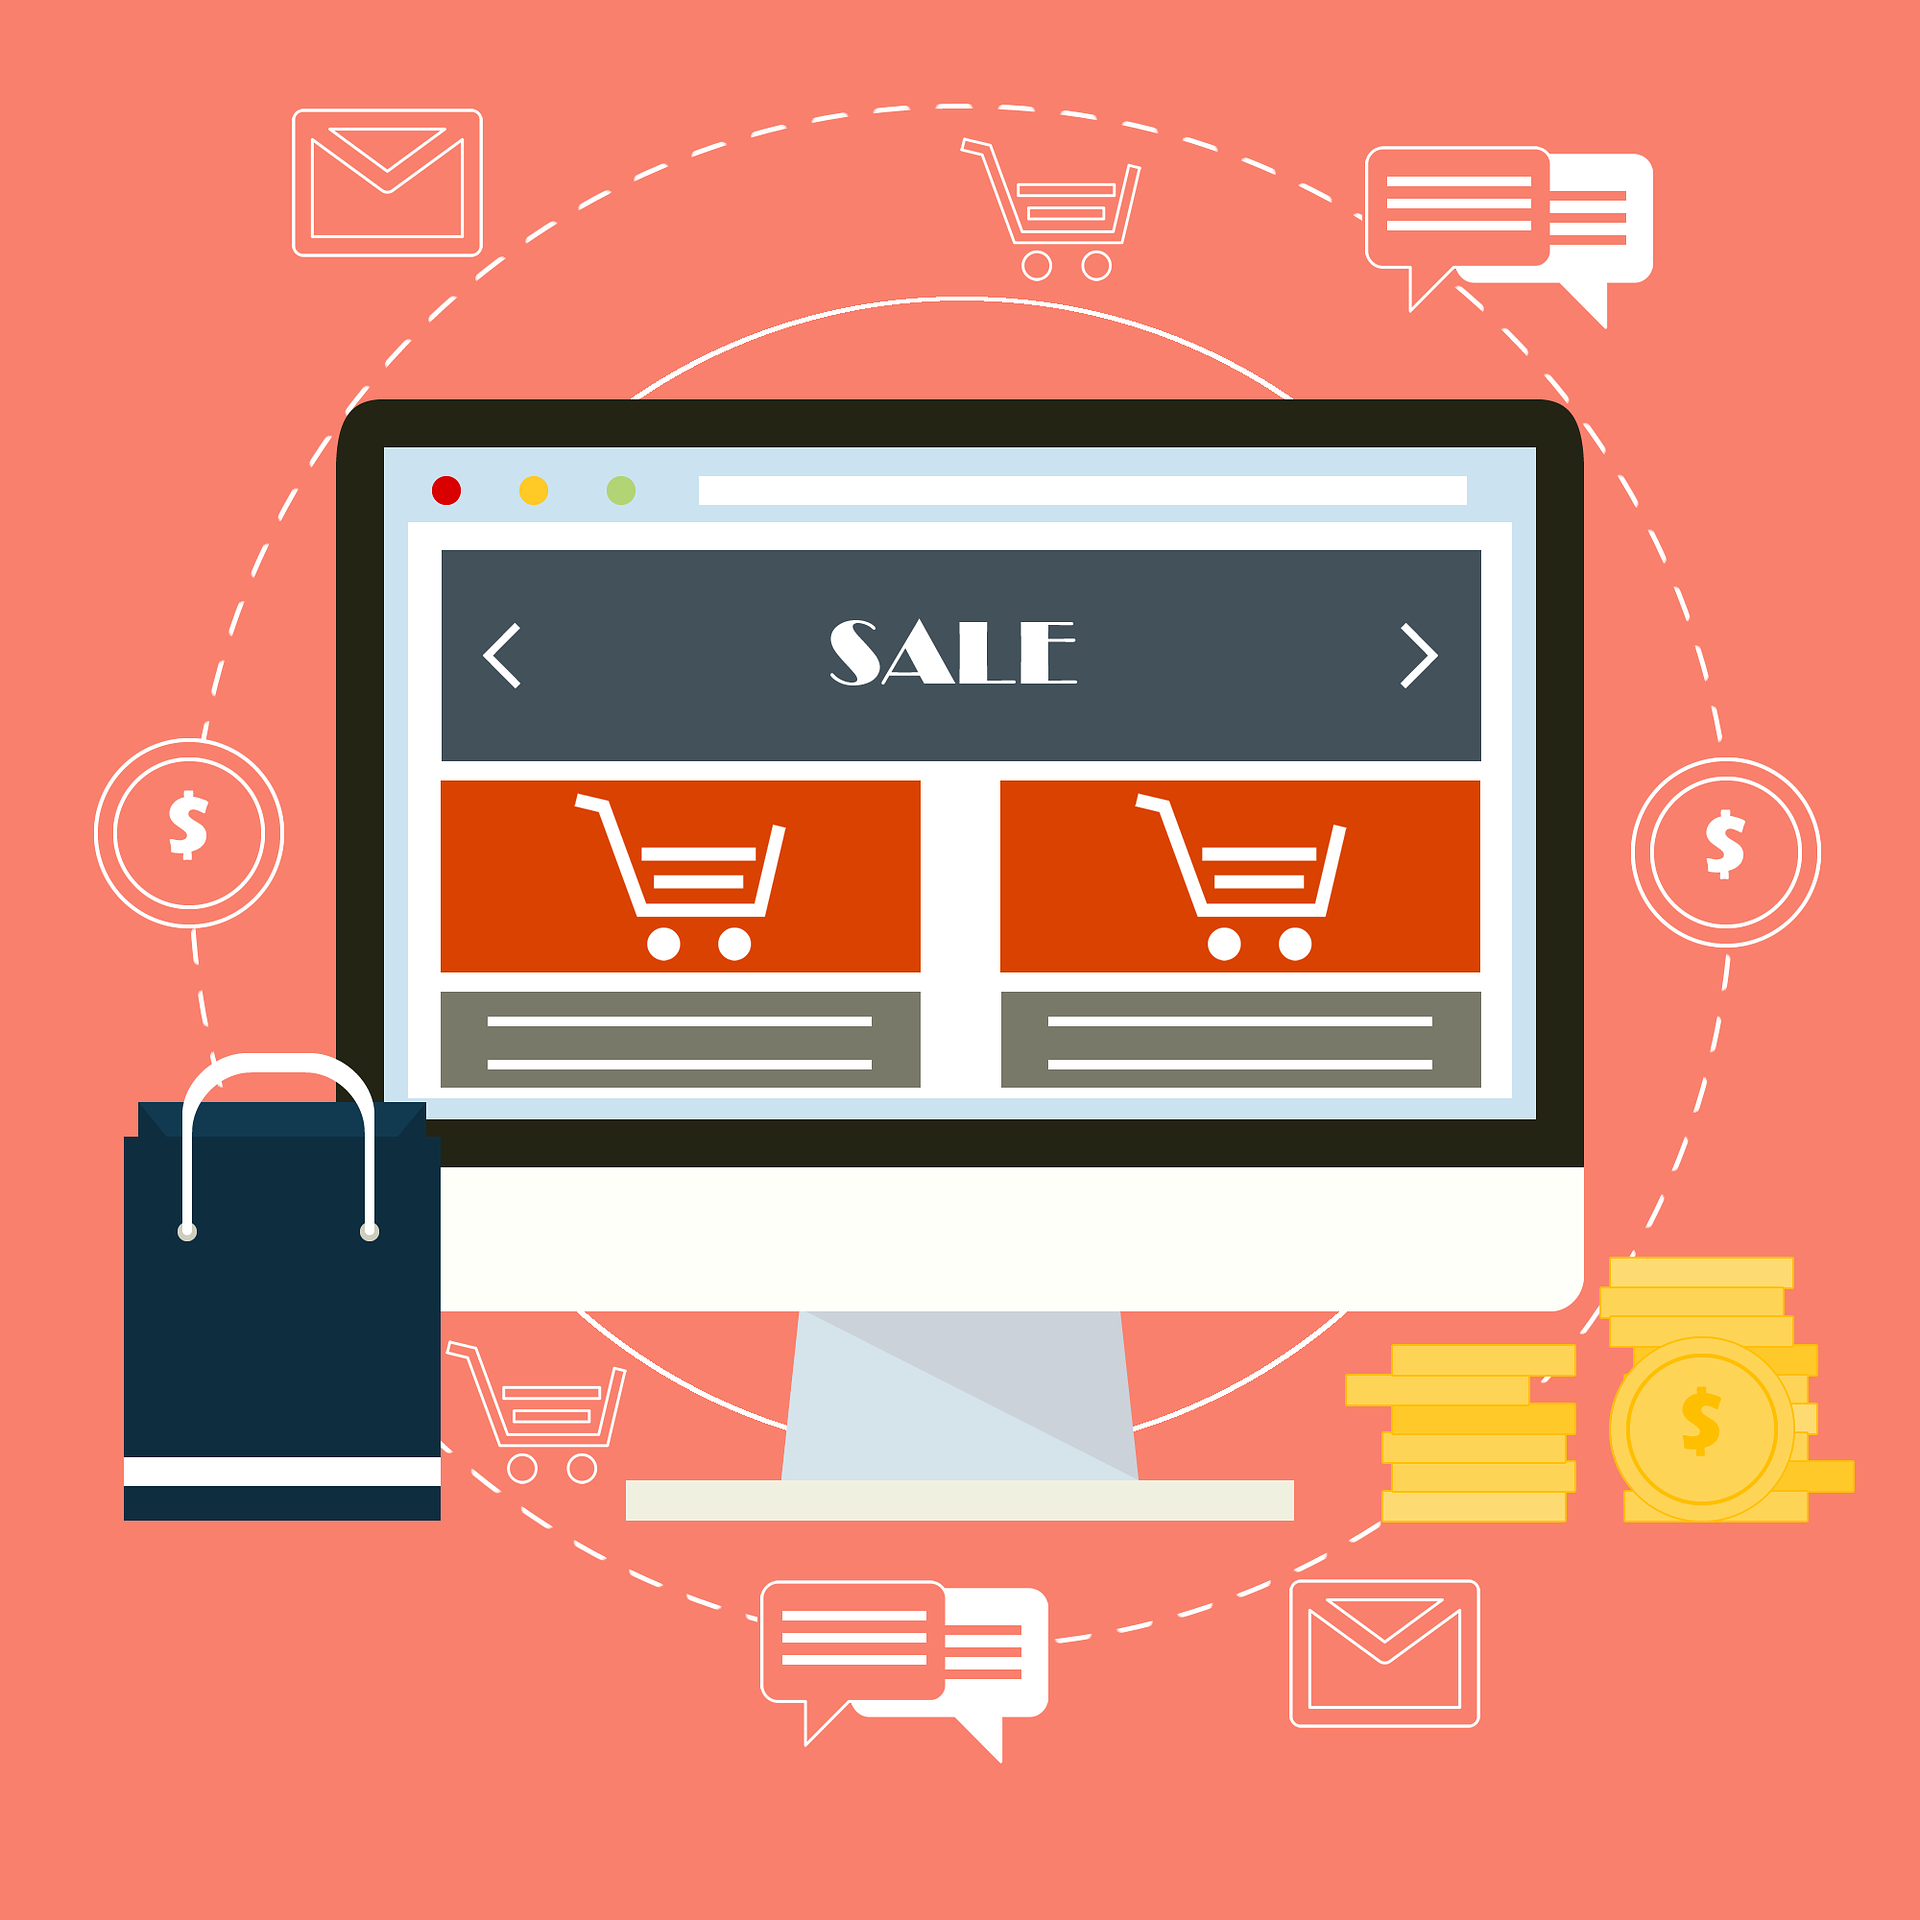 Technology solutions that will help you jumpstart your eCommerce